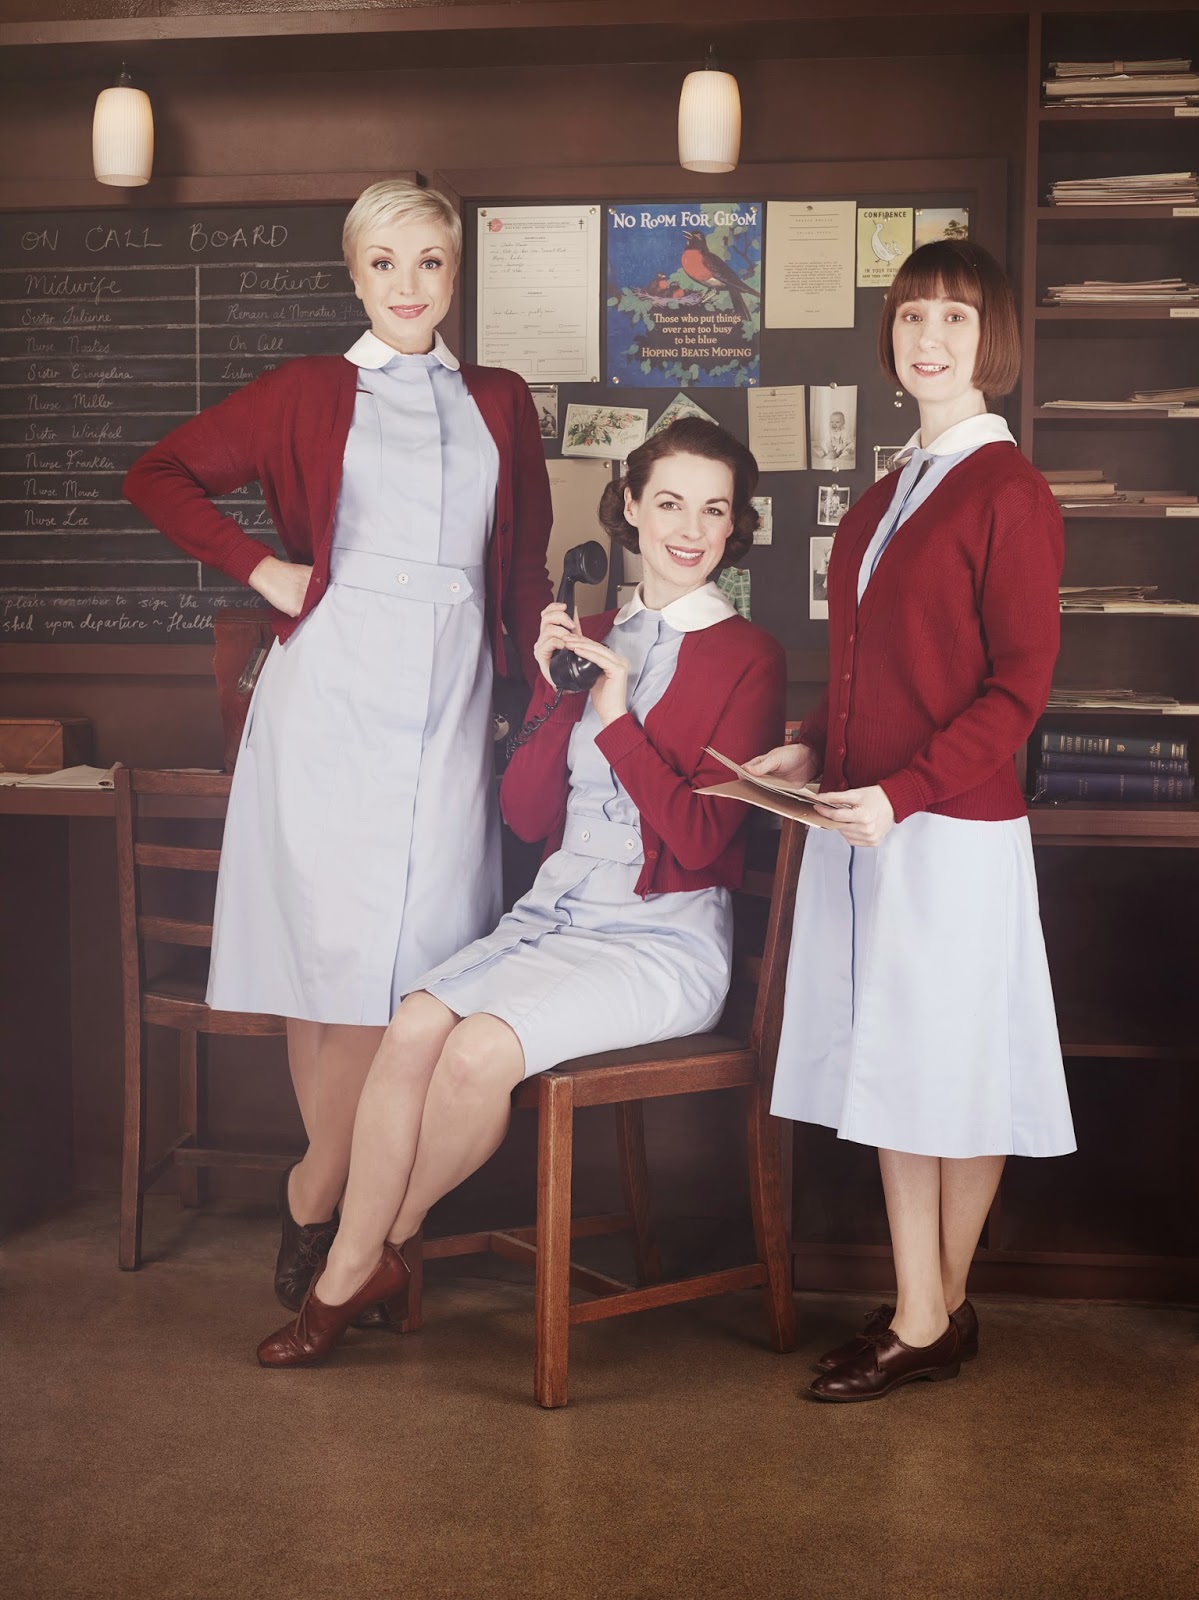 Call the Midwife should be the main feature... 